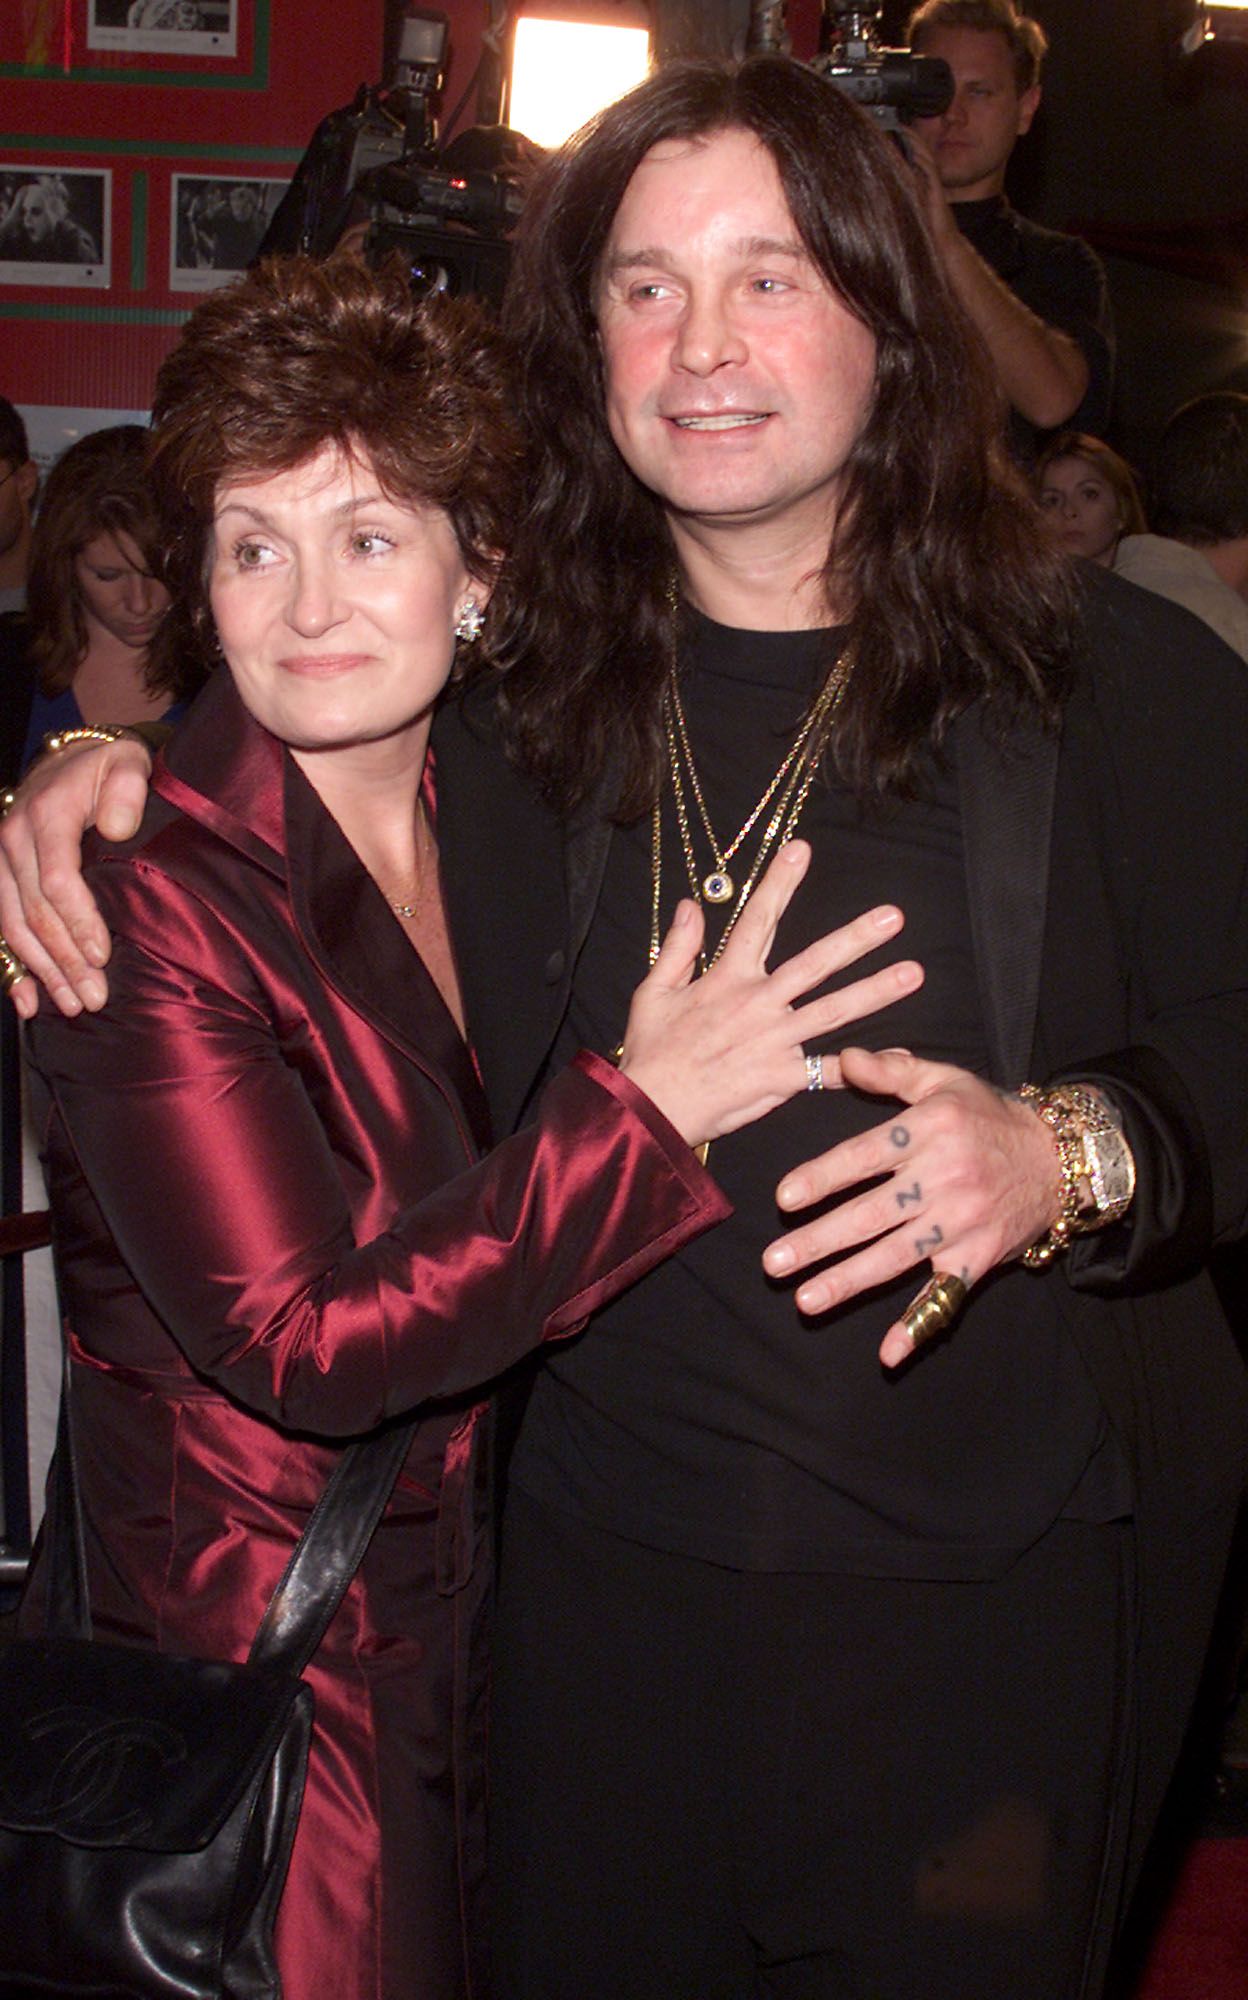 Sharon and Ozzy Osbourne at the premiere of "Little Nicky" in Los Angeles, California on November 2, 2000 | Photo: Getty Images